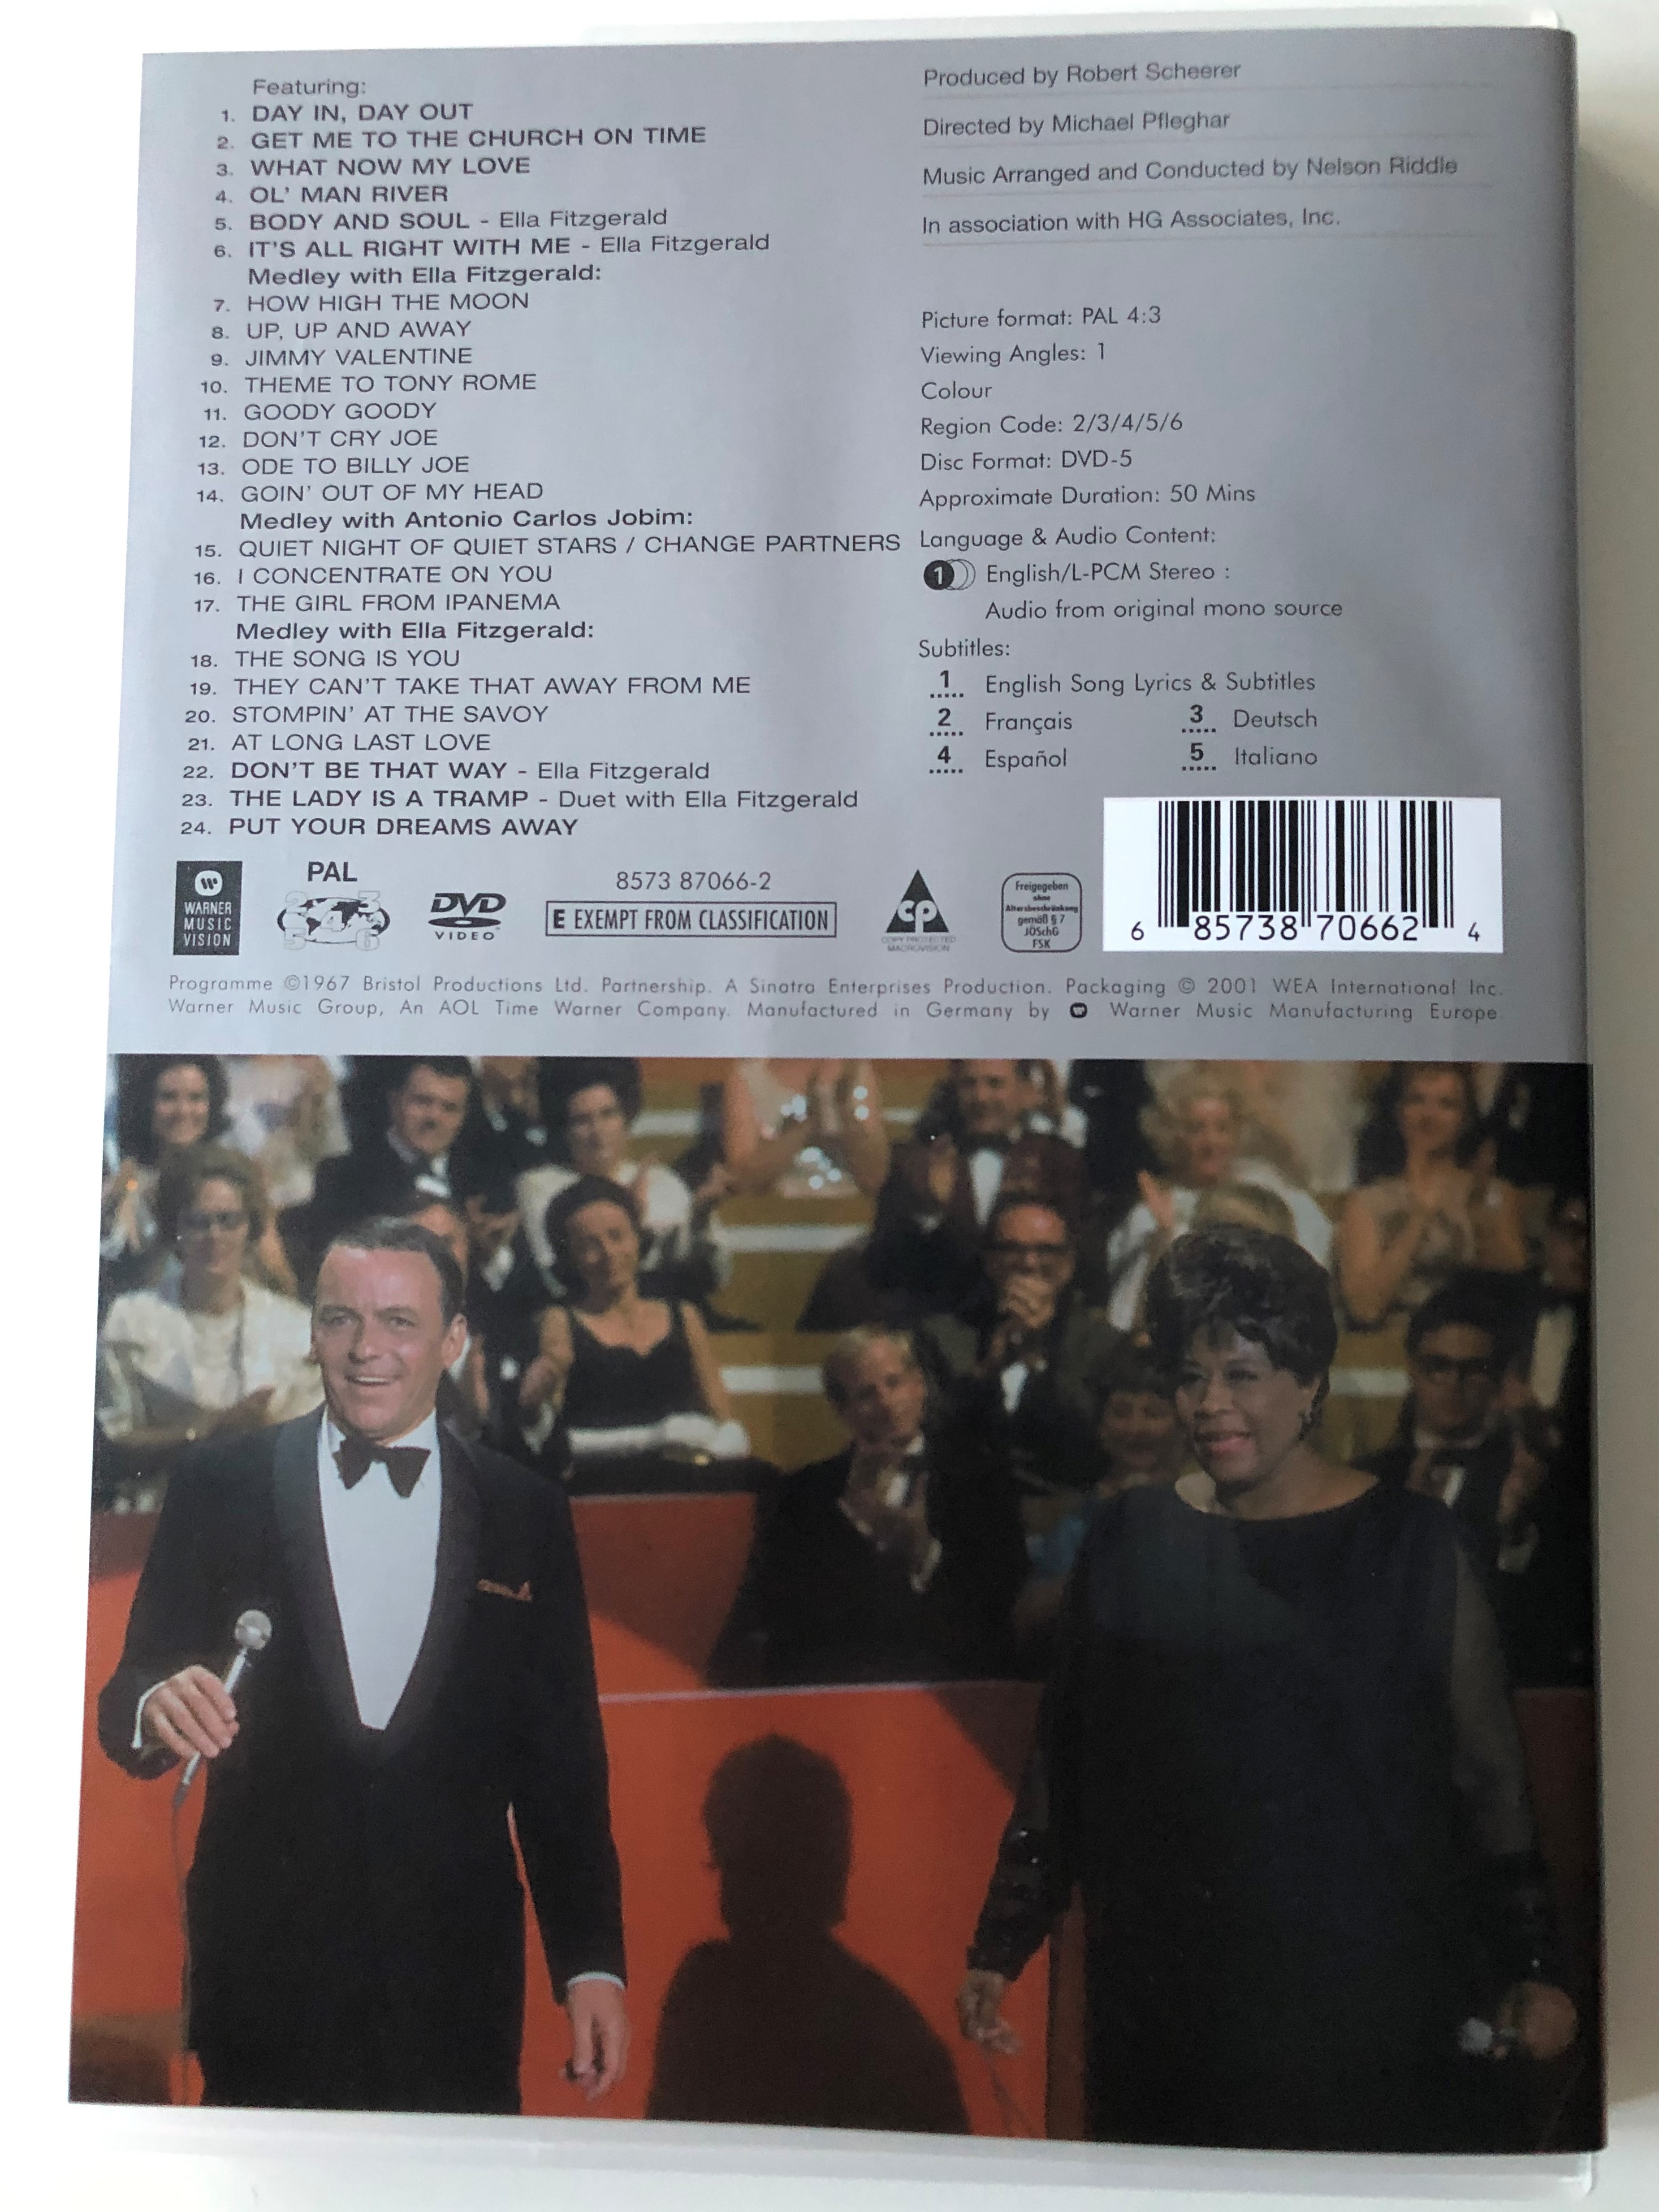 Frank Sinatra - A man and his music DVD With special guests Ella Fitzgerald  and Antonio Carlos Jobim / Directed by Michael Pfleghar / Music Arranged  and Conducted by Nelson Riddle - bibleinmylanguage